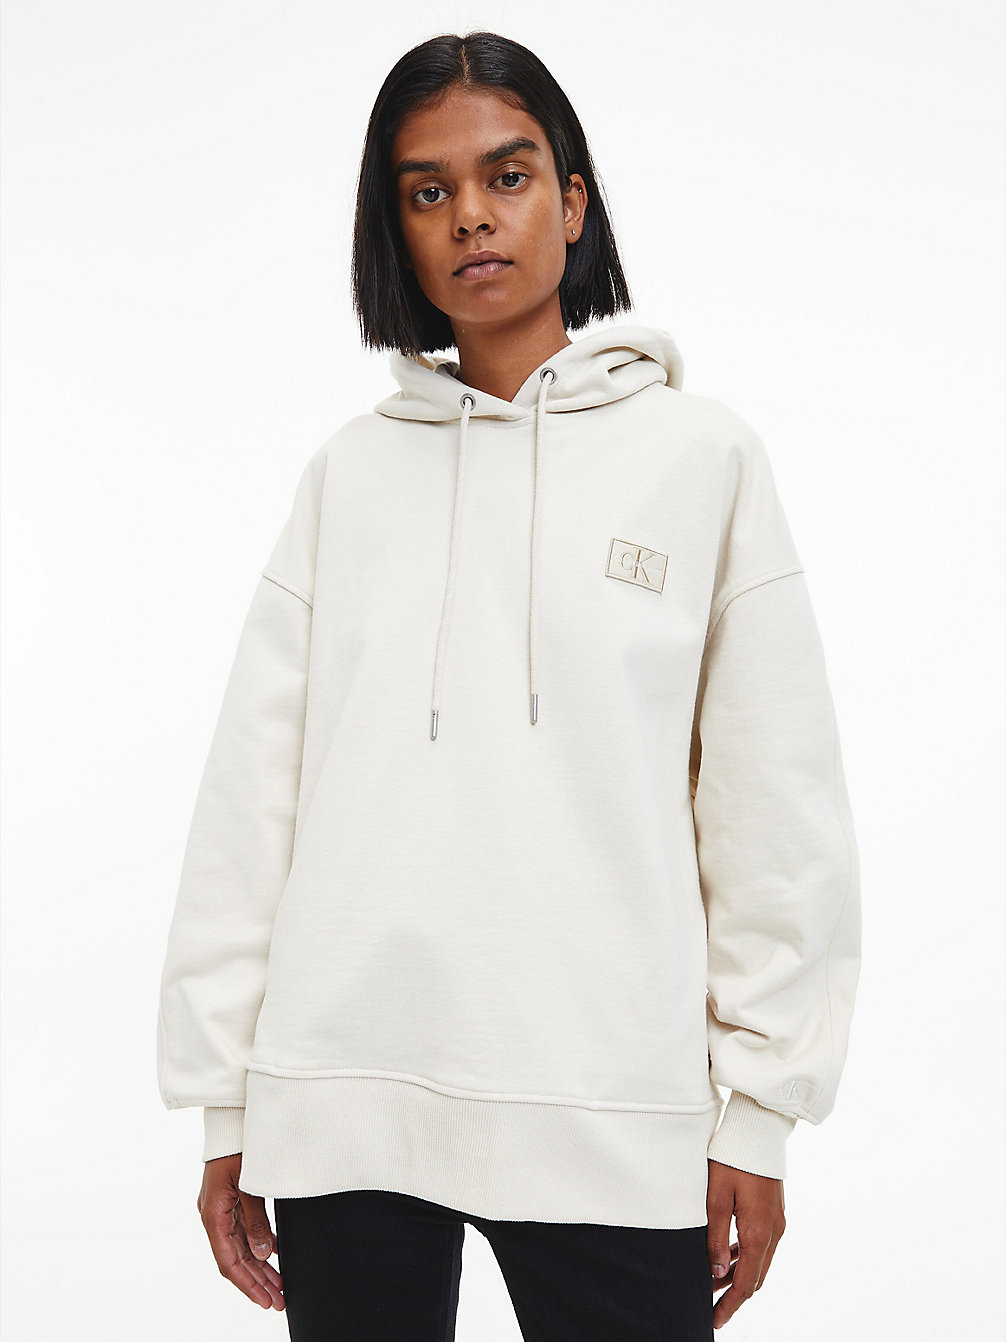 EGGSHELL Oversized Recycled Cotton Hoodie undefined women Calvin Klein